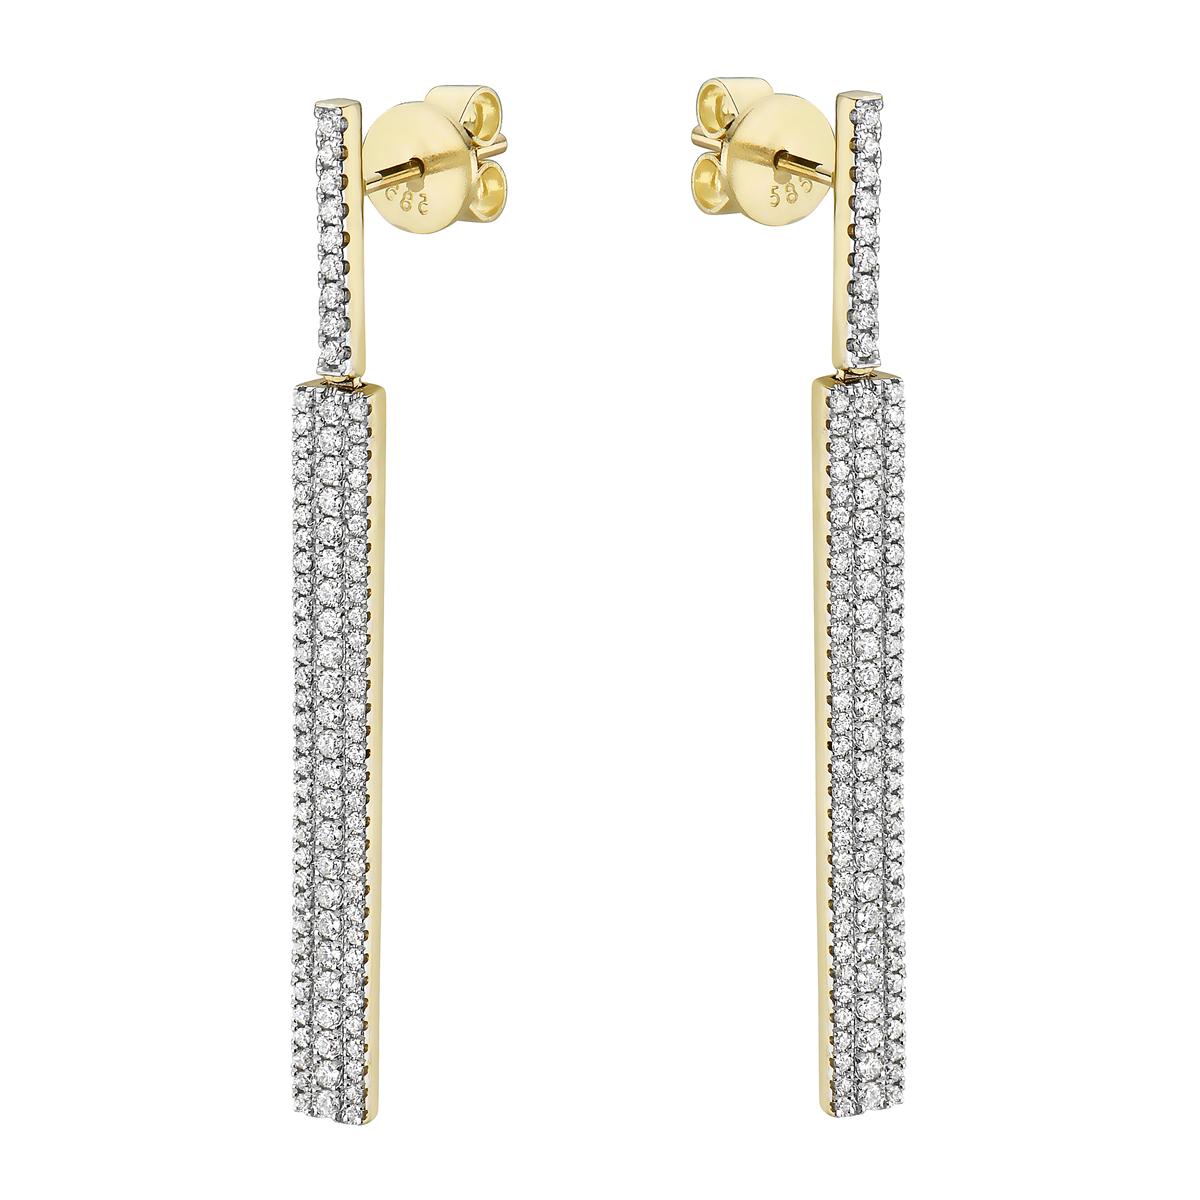 With these exquisite yellow gold dangle earrings, style and glamour are in the spotlight. These hoops are set in 14-carat gold, made out of 3.4 grams of gold. The color of the diamonds is GH. The clarity is SI1-OSI2. These earrings are made out of